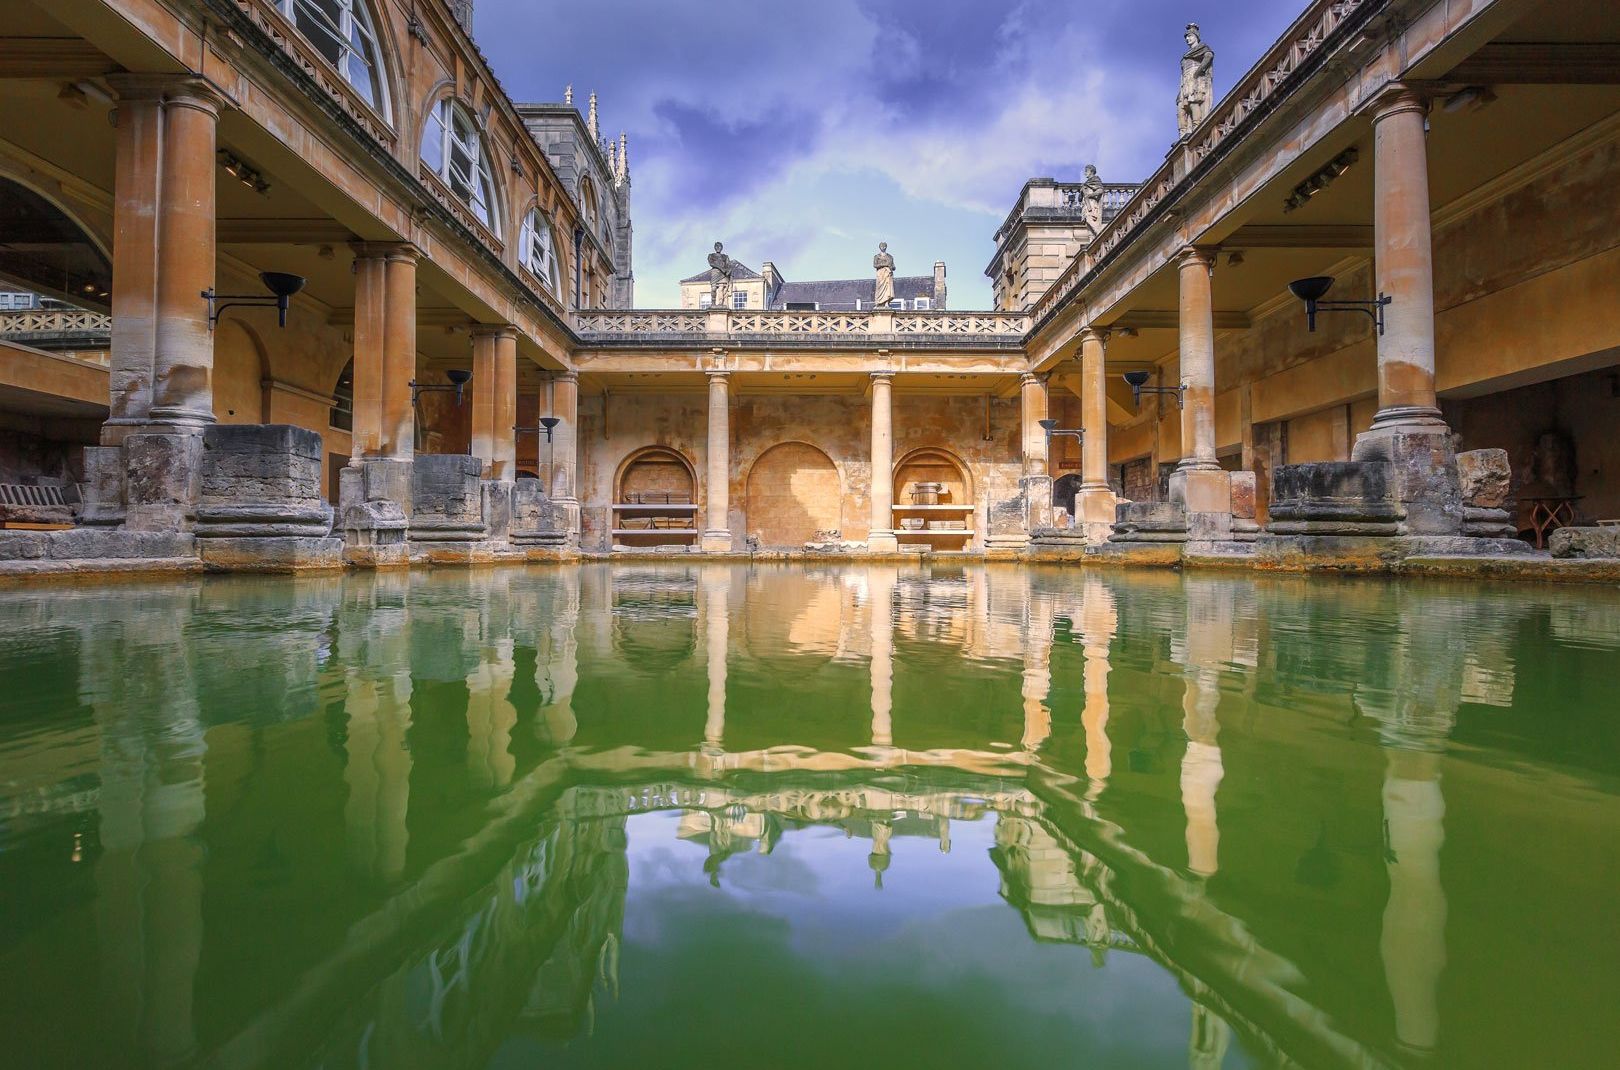 View from the water's surface of the Roman Baths in Bath